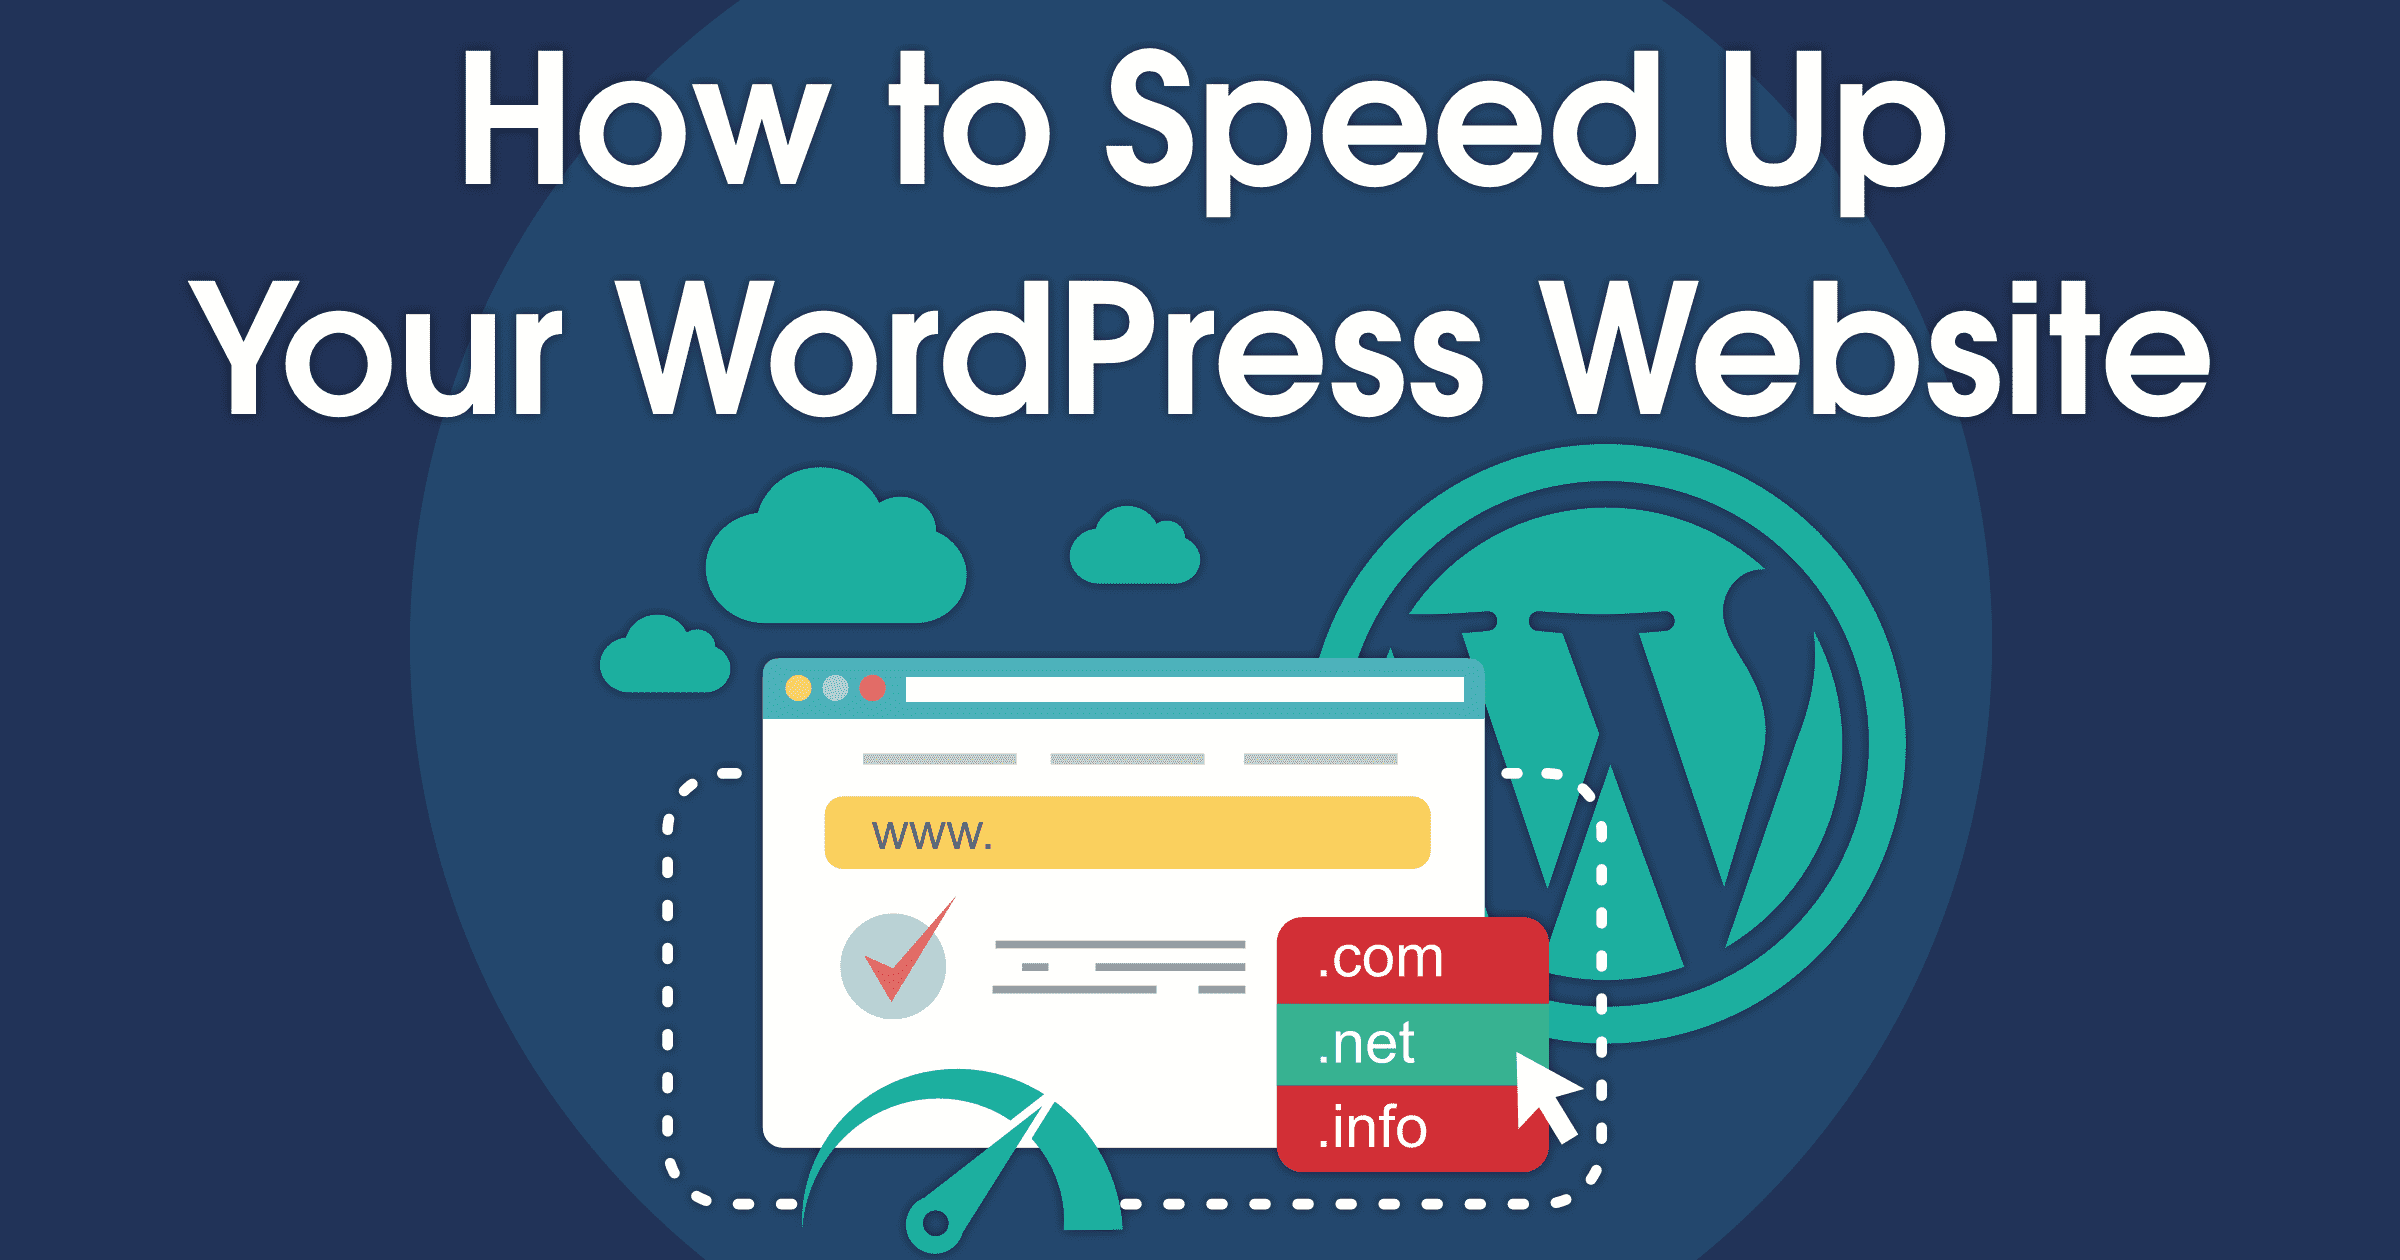 Speed Up Your WordPress Website for Better SEO